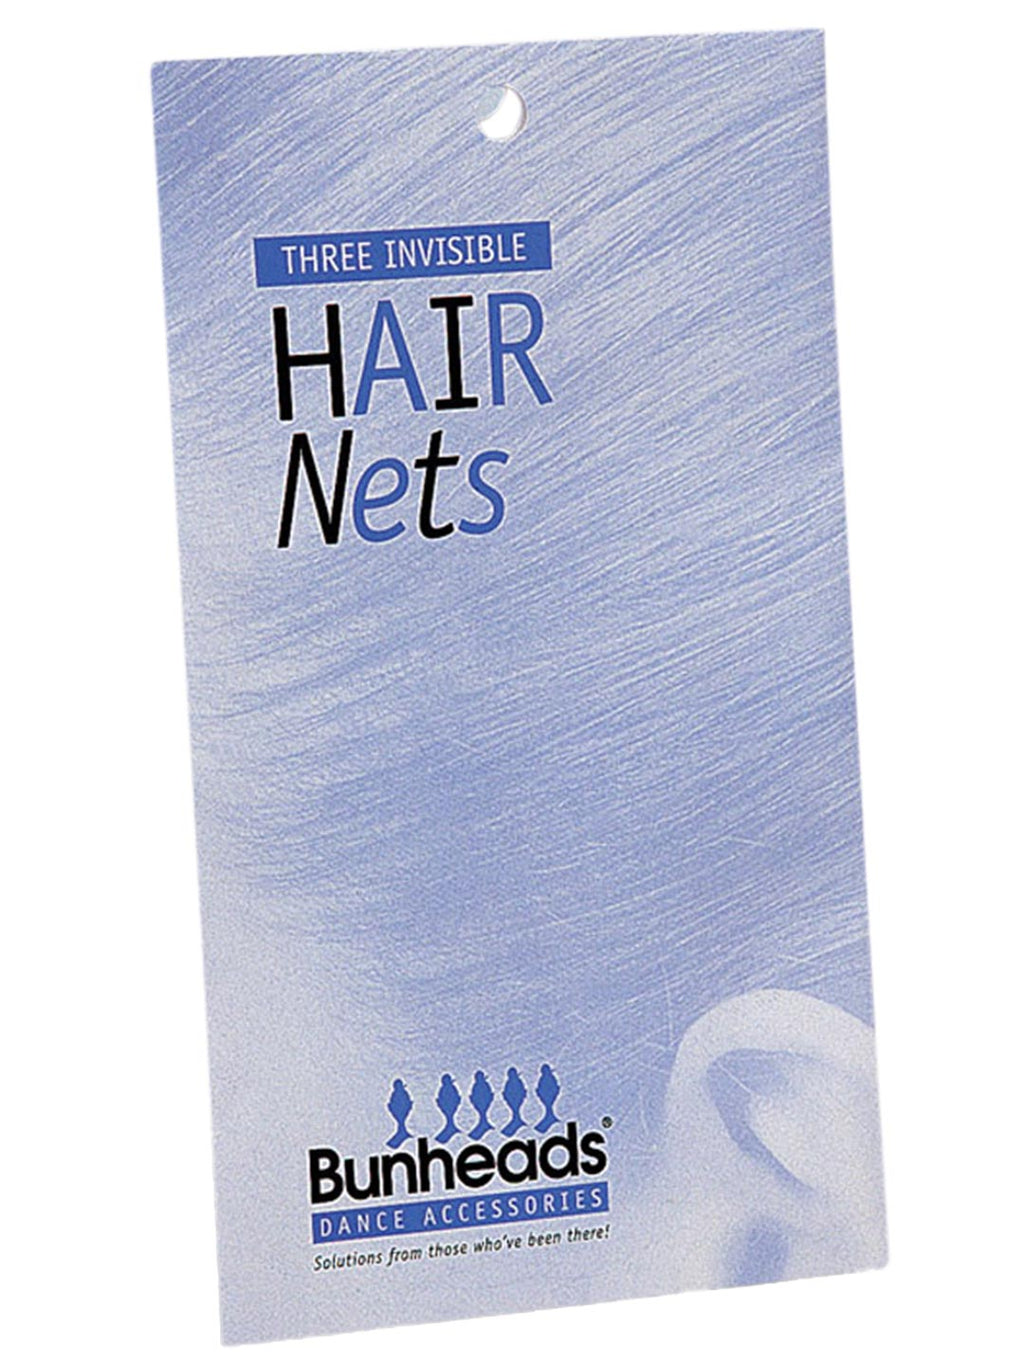 Bunheads Invisible Hair Nets (3 Pack)